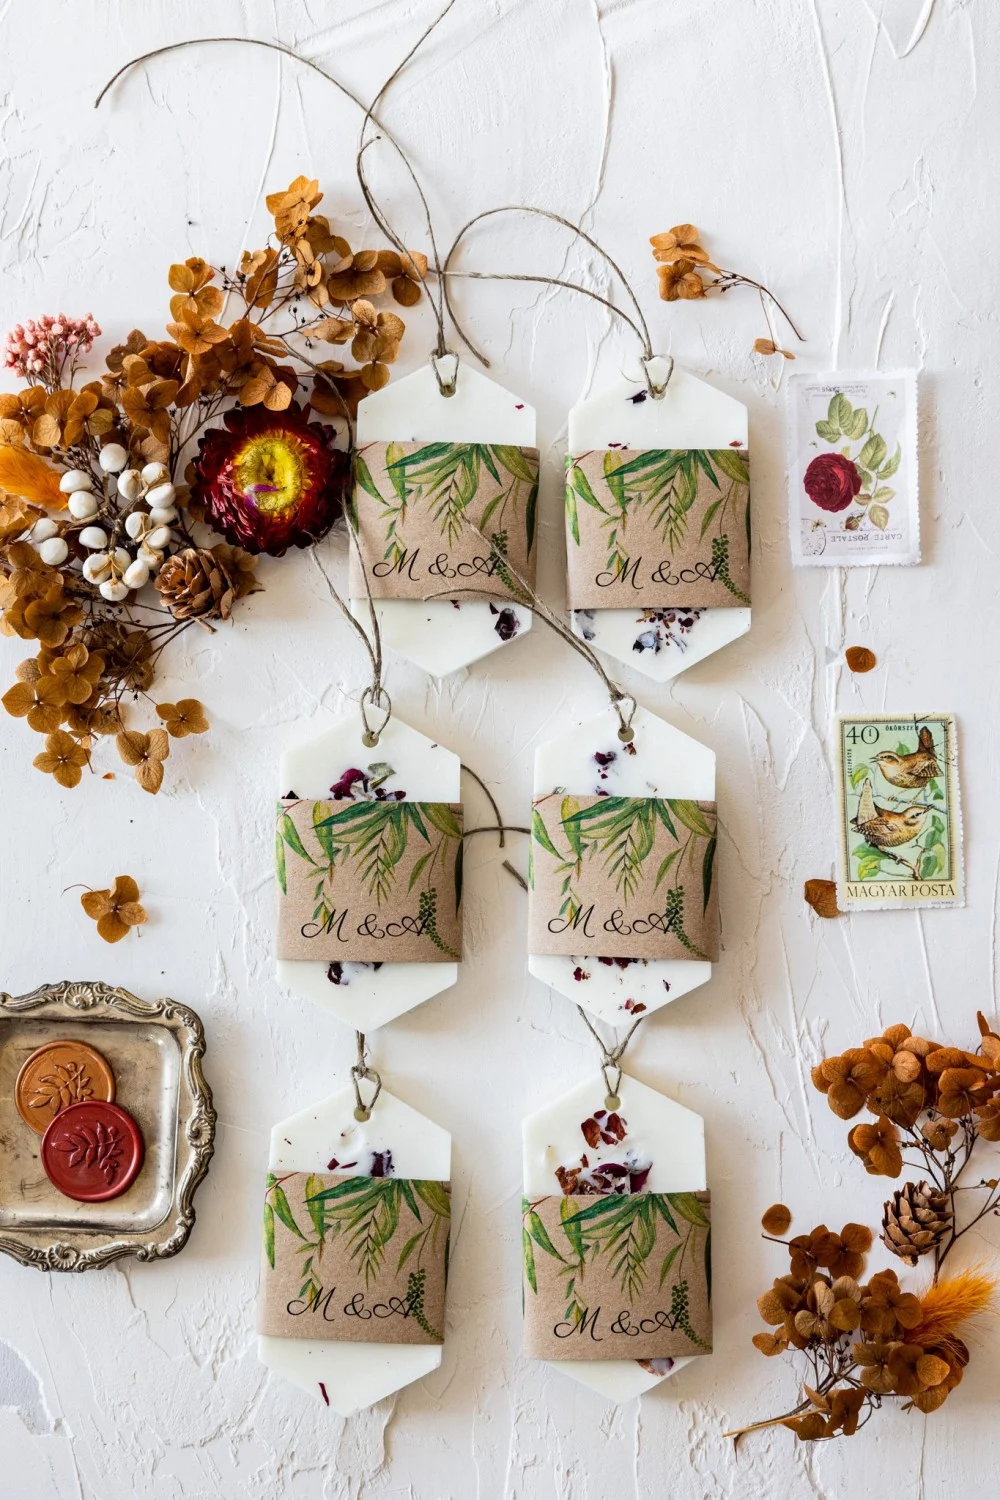 Personalized, handmade Forest Soy Wax Favors for your Wedding Guests